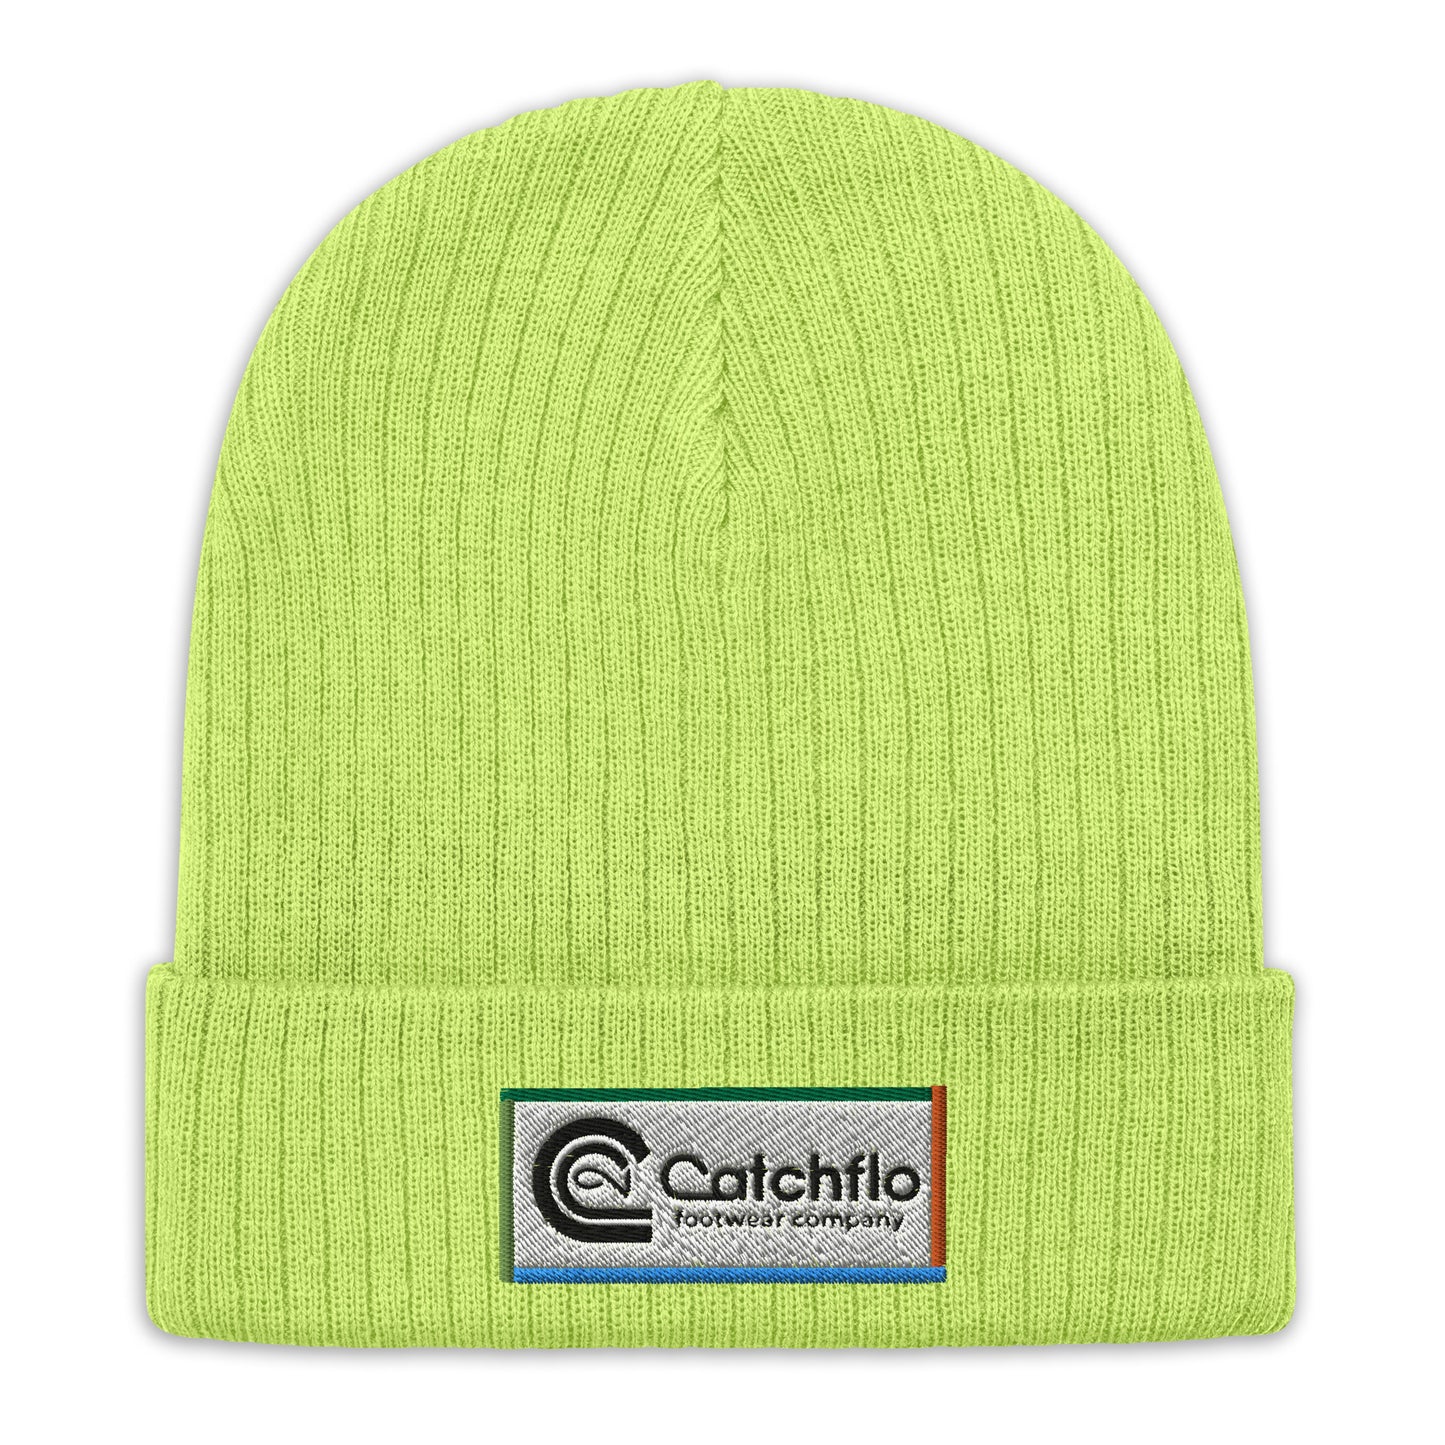 Catchflo Footwear Company Ribbed Knit Beanie (8 color choices)